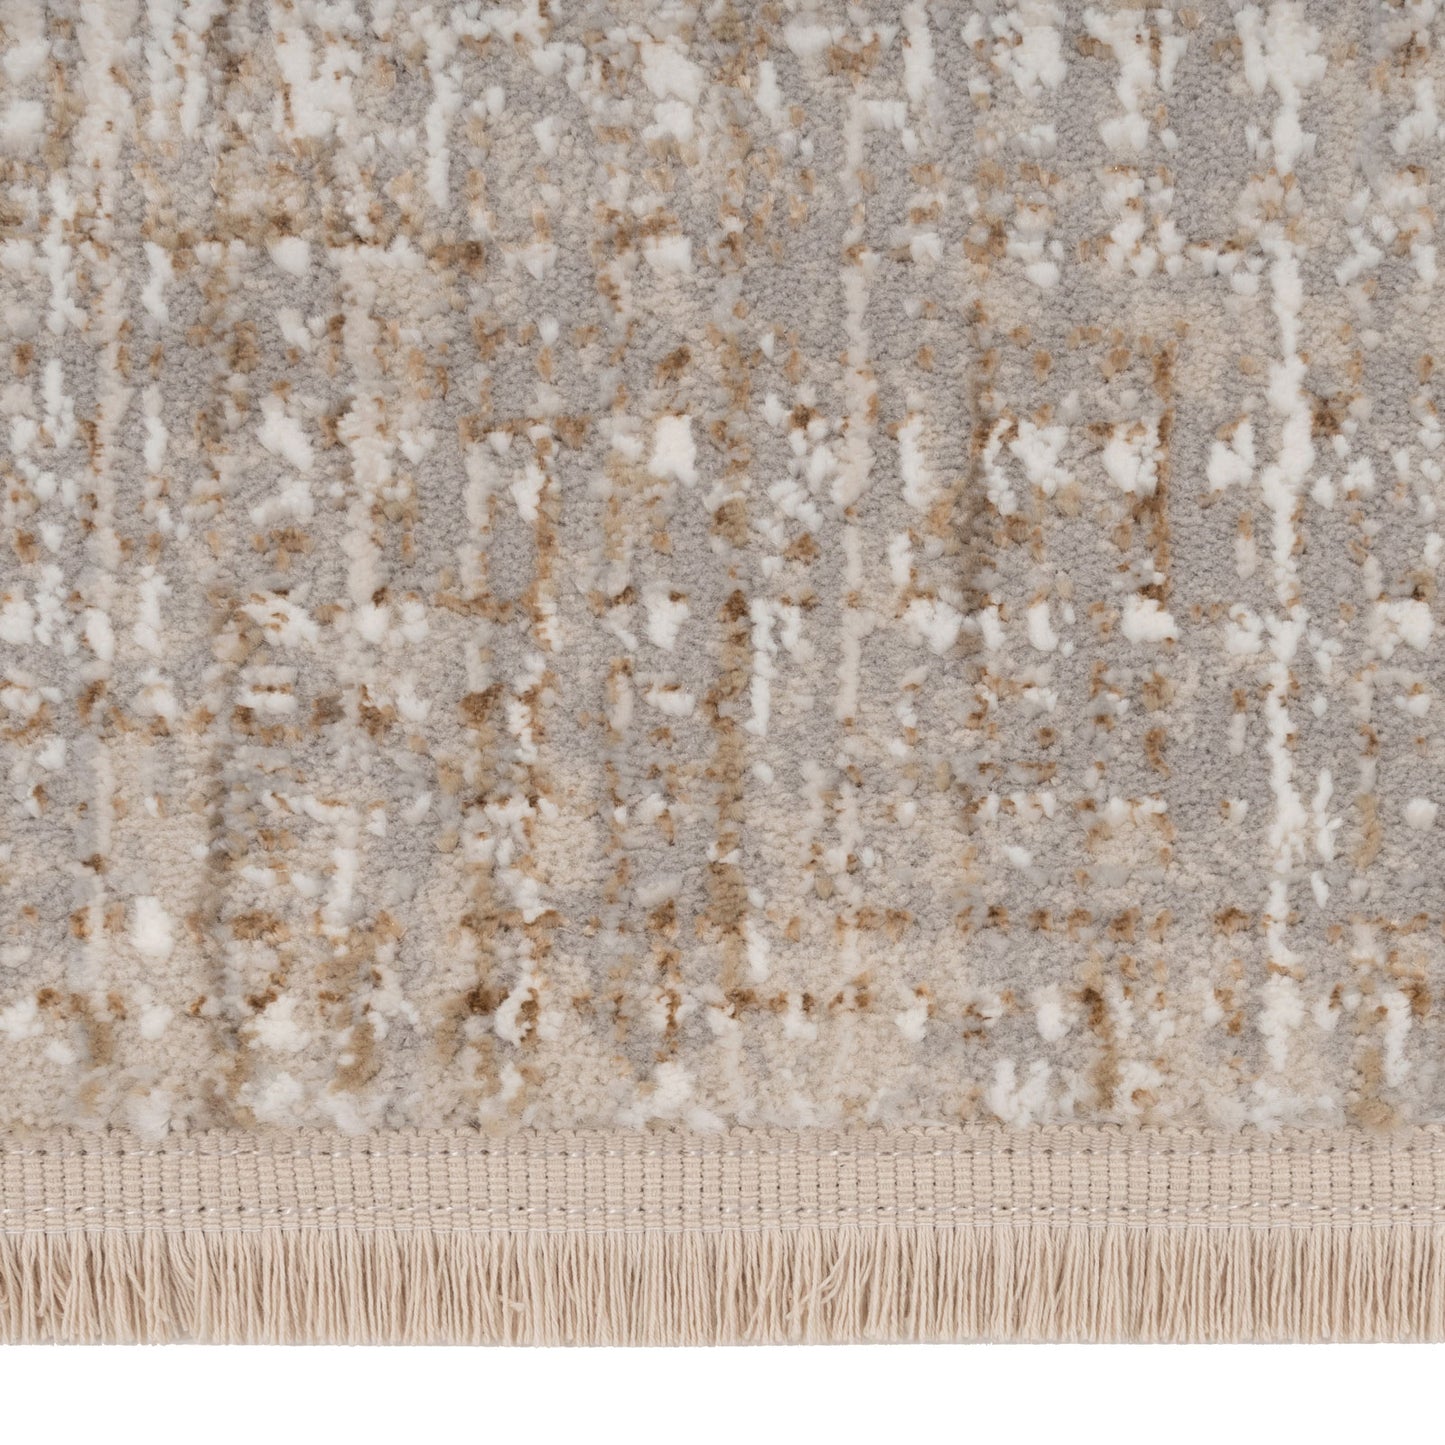 Golden Abstract Living Room Rug - Emse